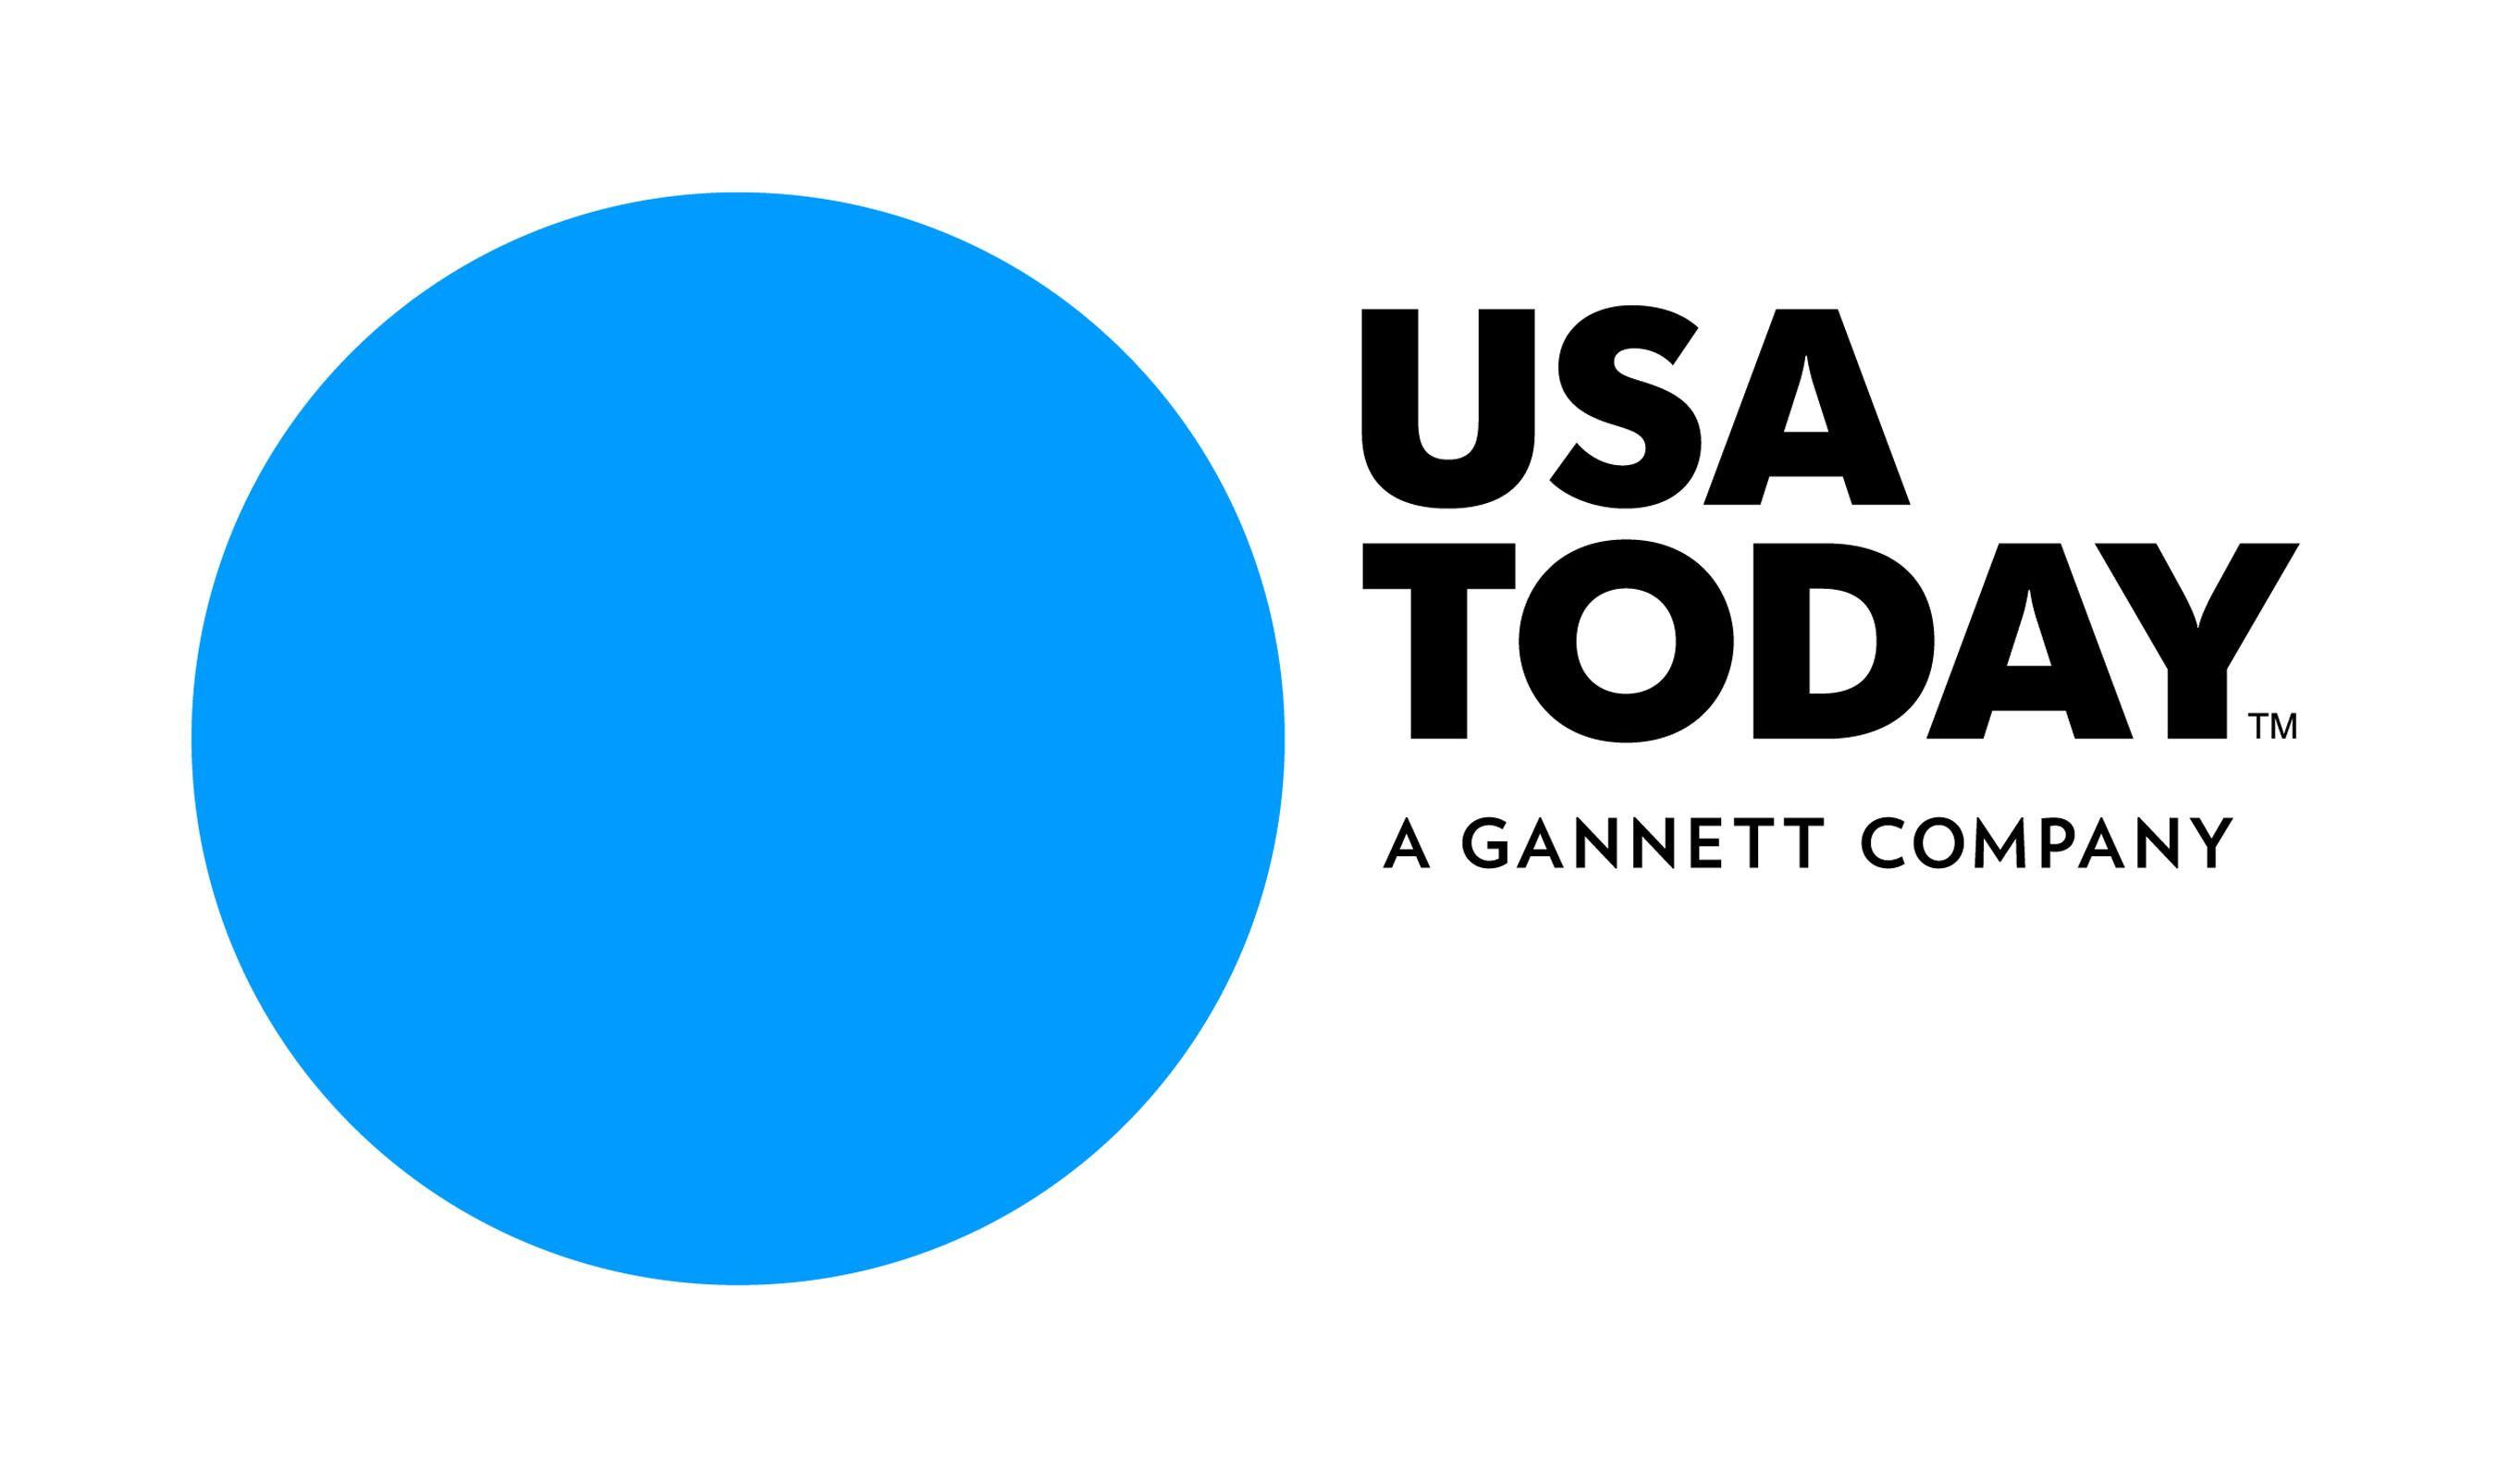 NewsApp Logo - USA TODAY Introduces First Ever Customized Campus News App